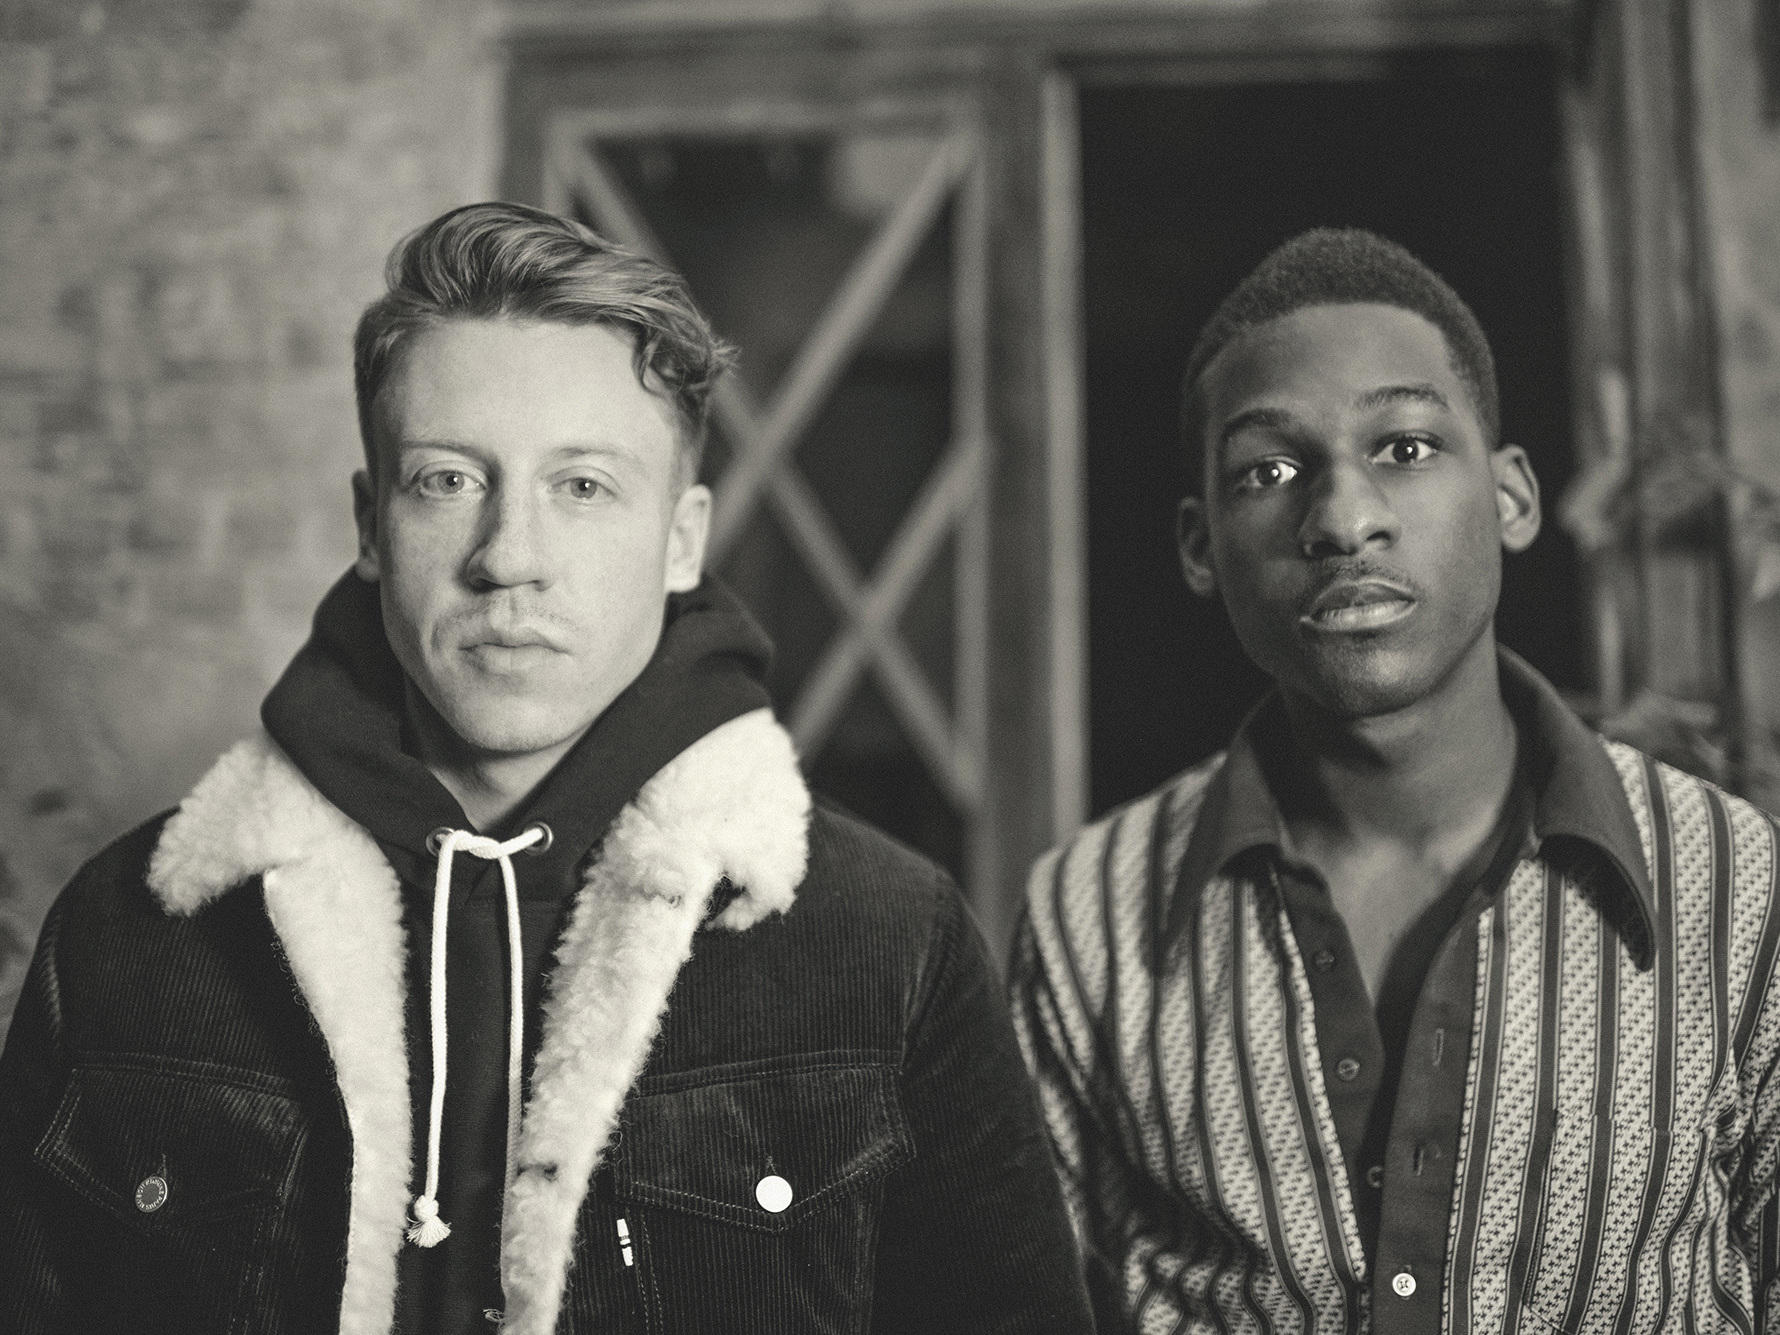 Hear Kevin The New Macklemore Ryan Lewis Song Featuring Leon